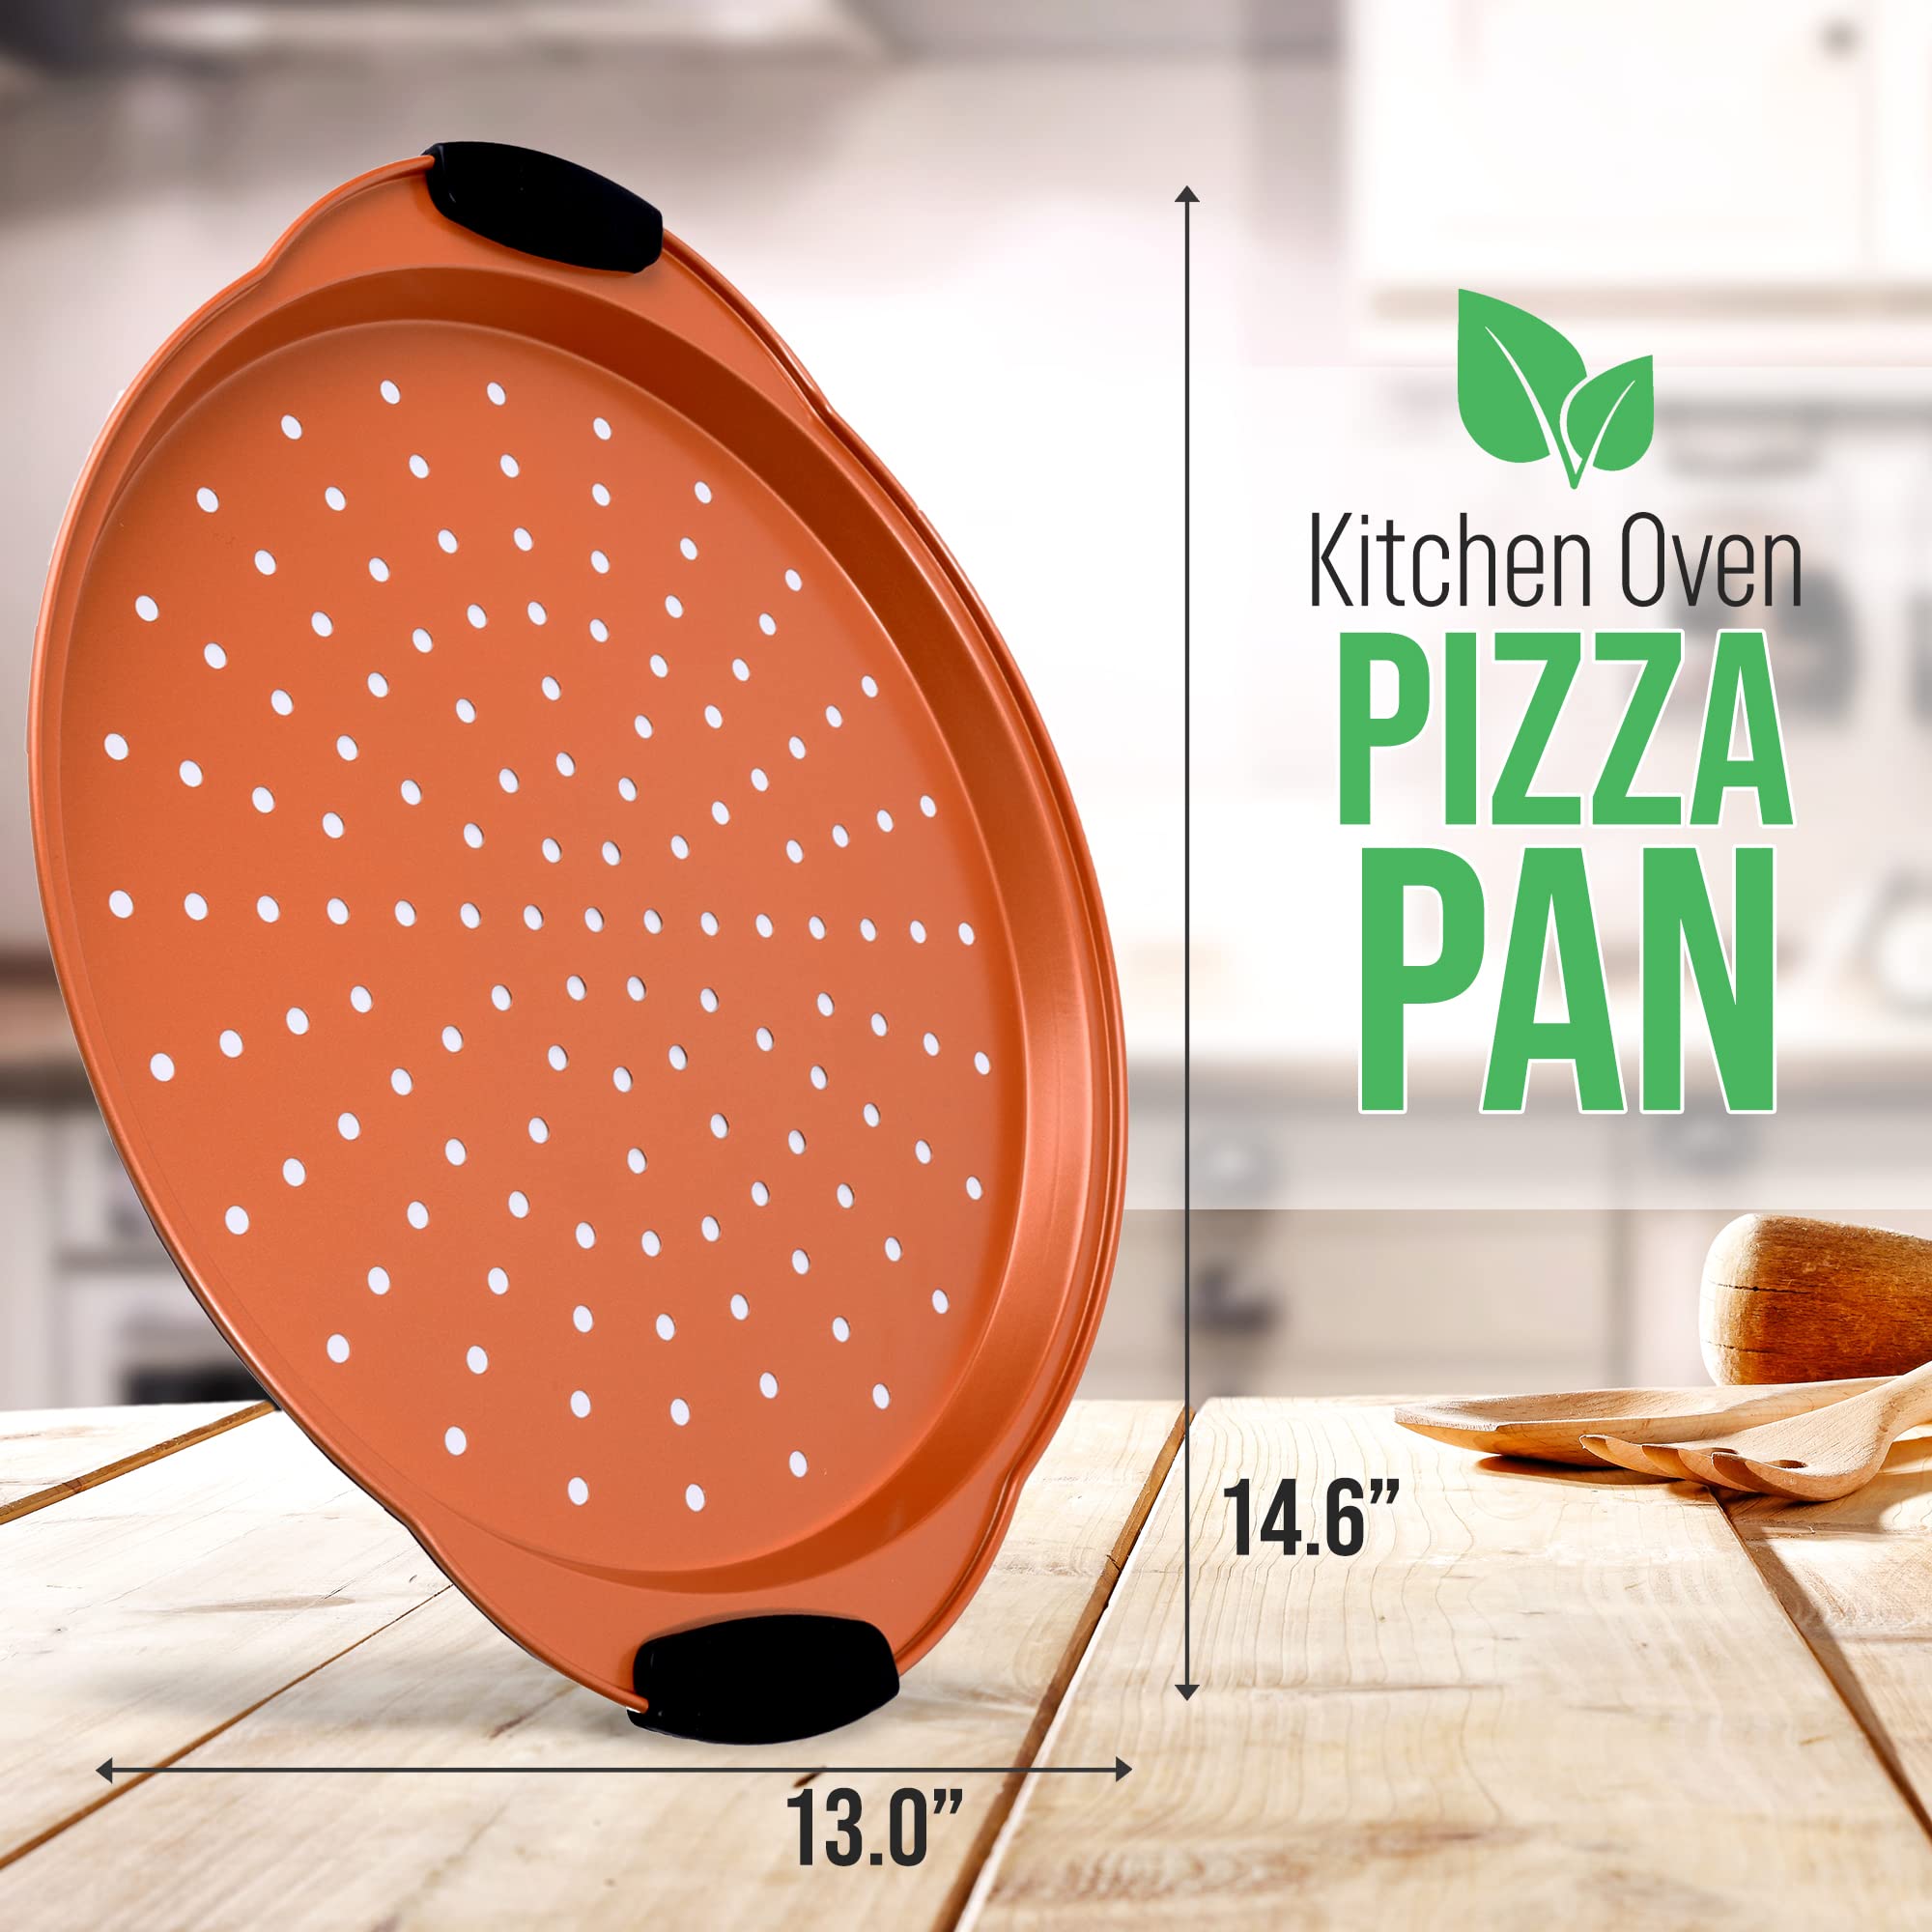 NutriChef Non-Stick Pizza Tray - with Silicone Handle, Round Steel Non-stick Pan with Perforated Holes, Premium Bakeware, Pizza Tray with Silicone and Oversized Handle, Dishwasher Safe - NCBPIZ4